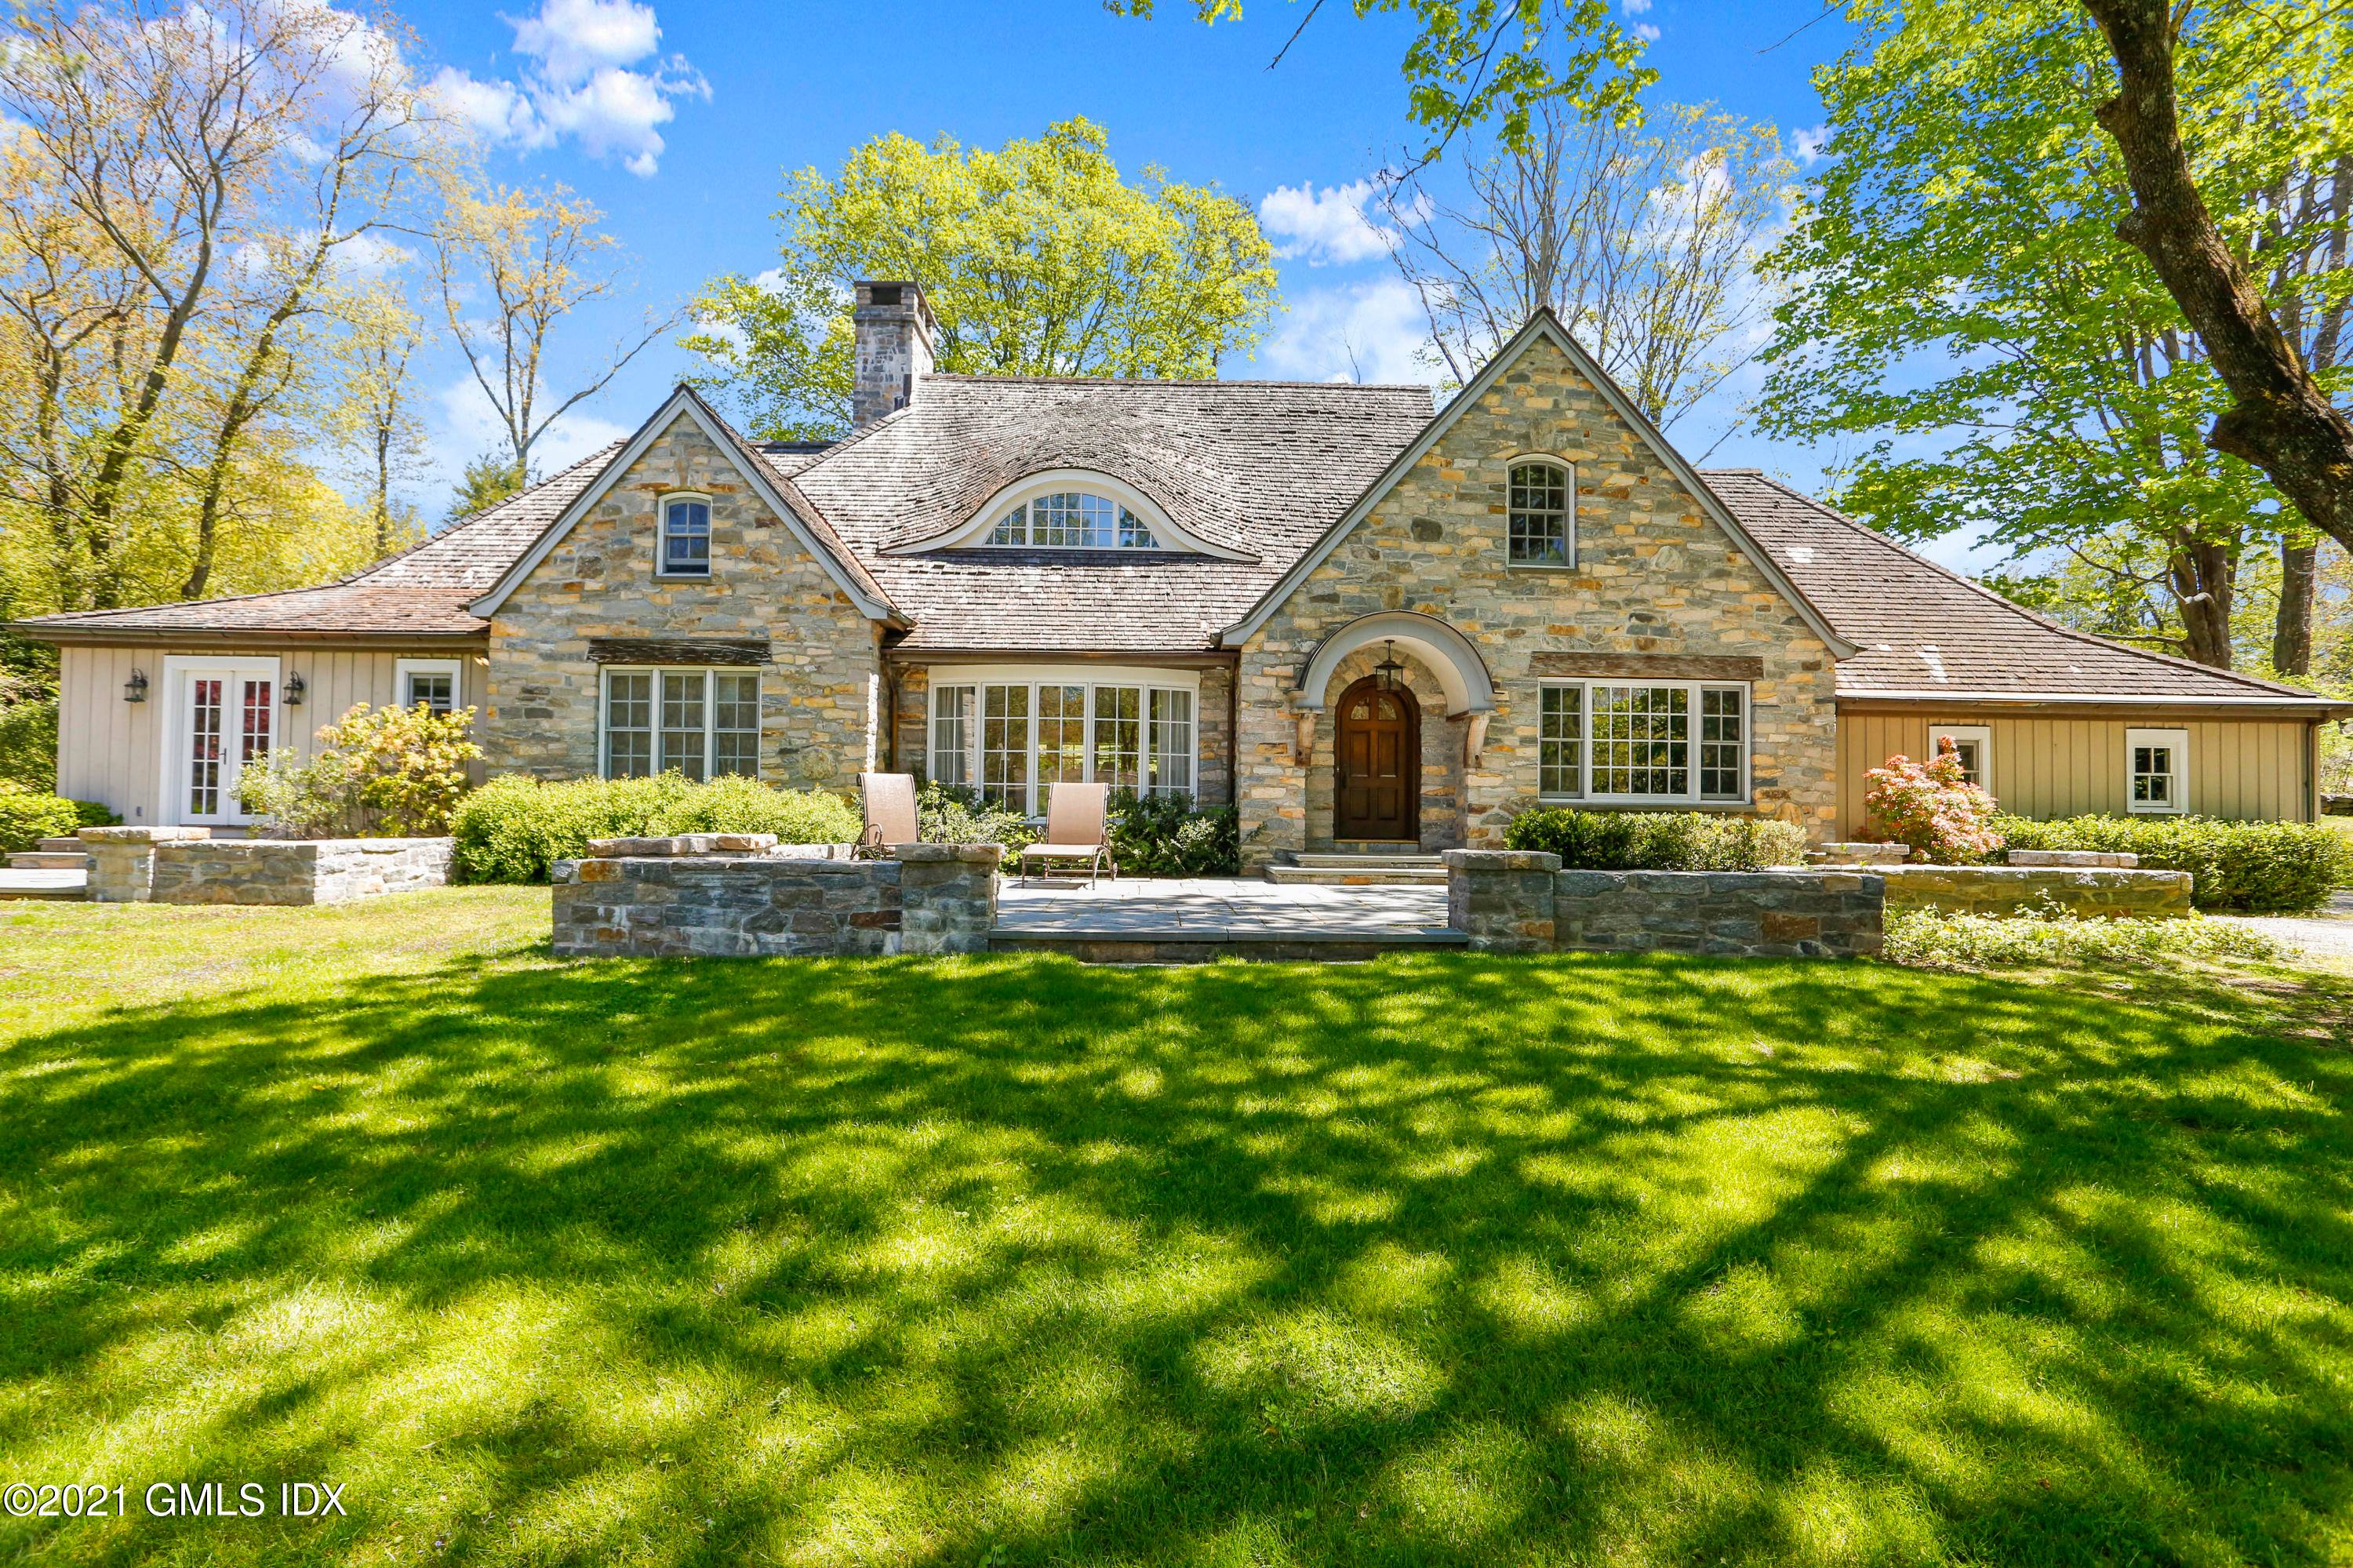 This beautifully refreshed stone residence secluded on a quiet mid country cul de sac is ready for you to customize.